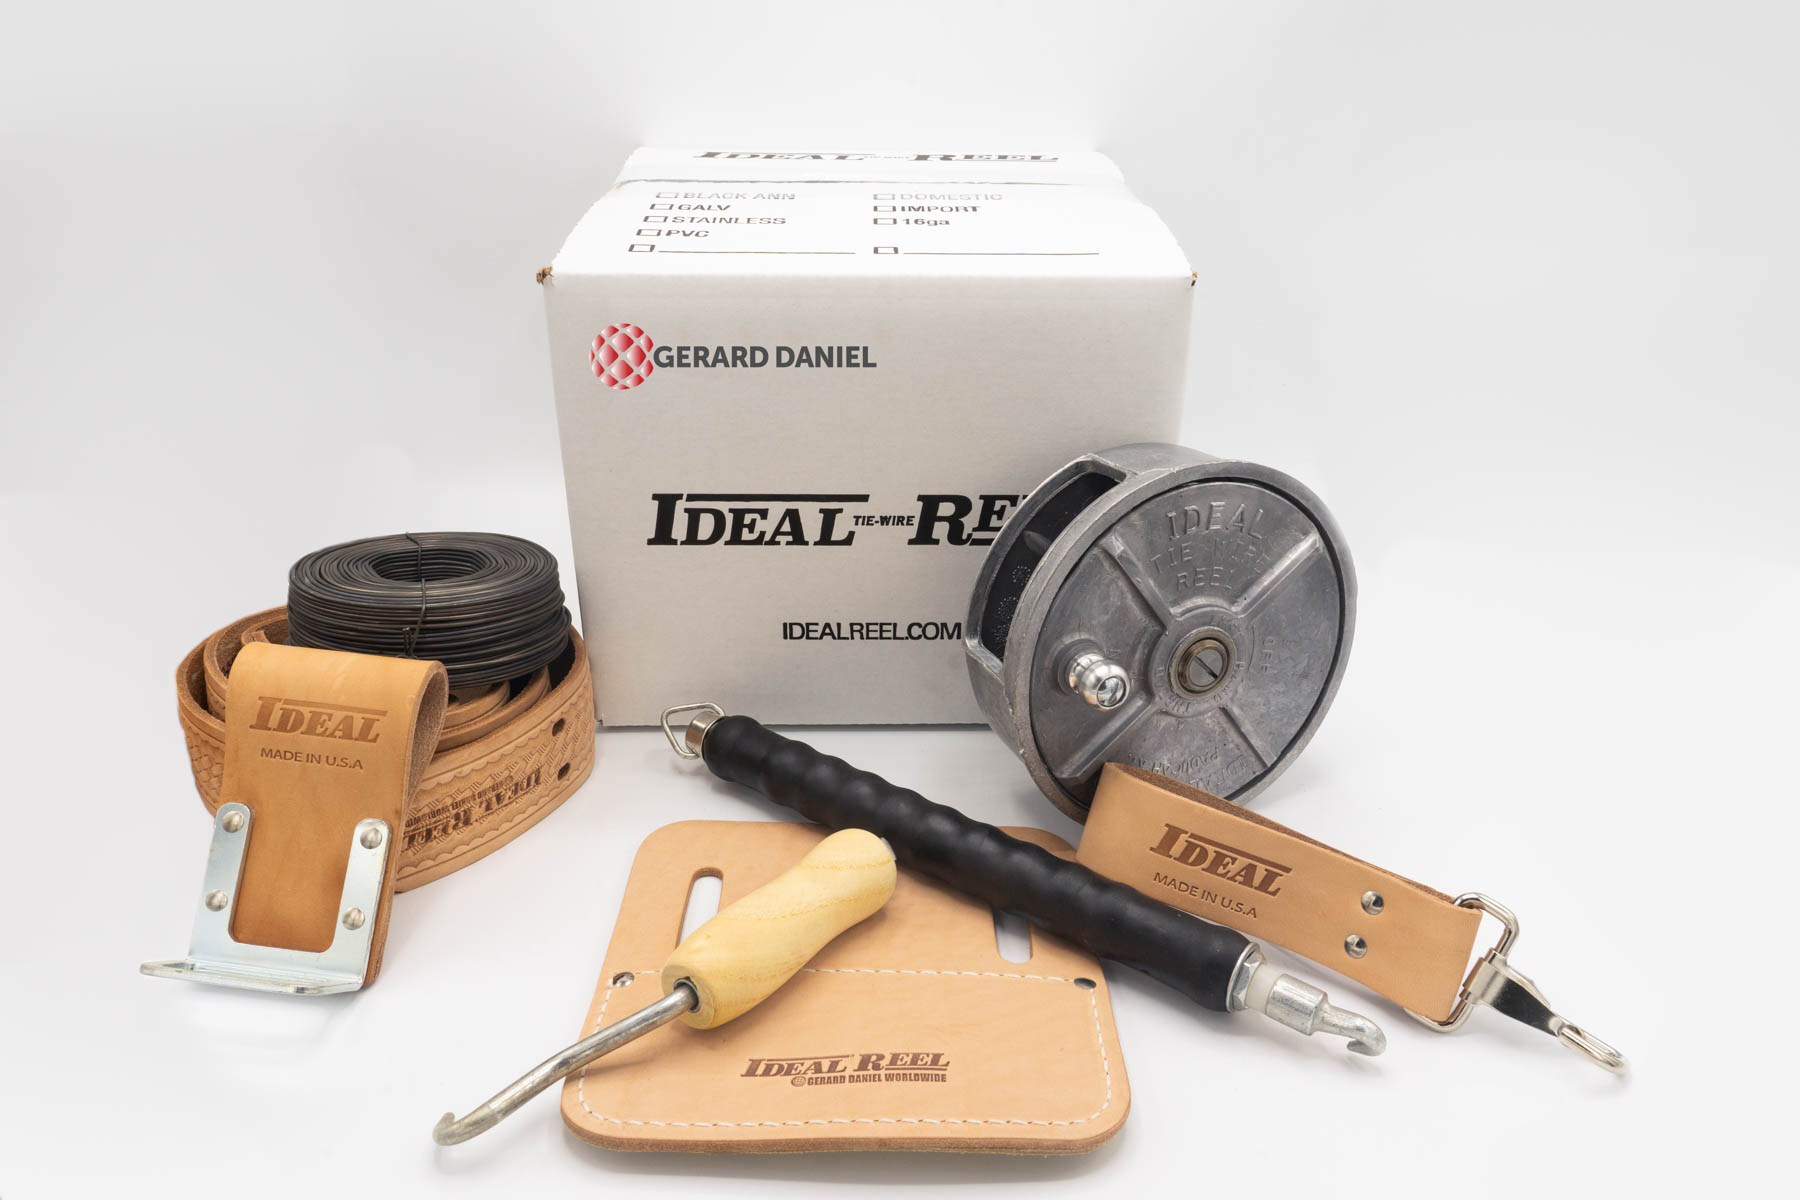 Ideal reel products